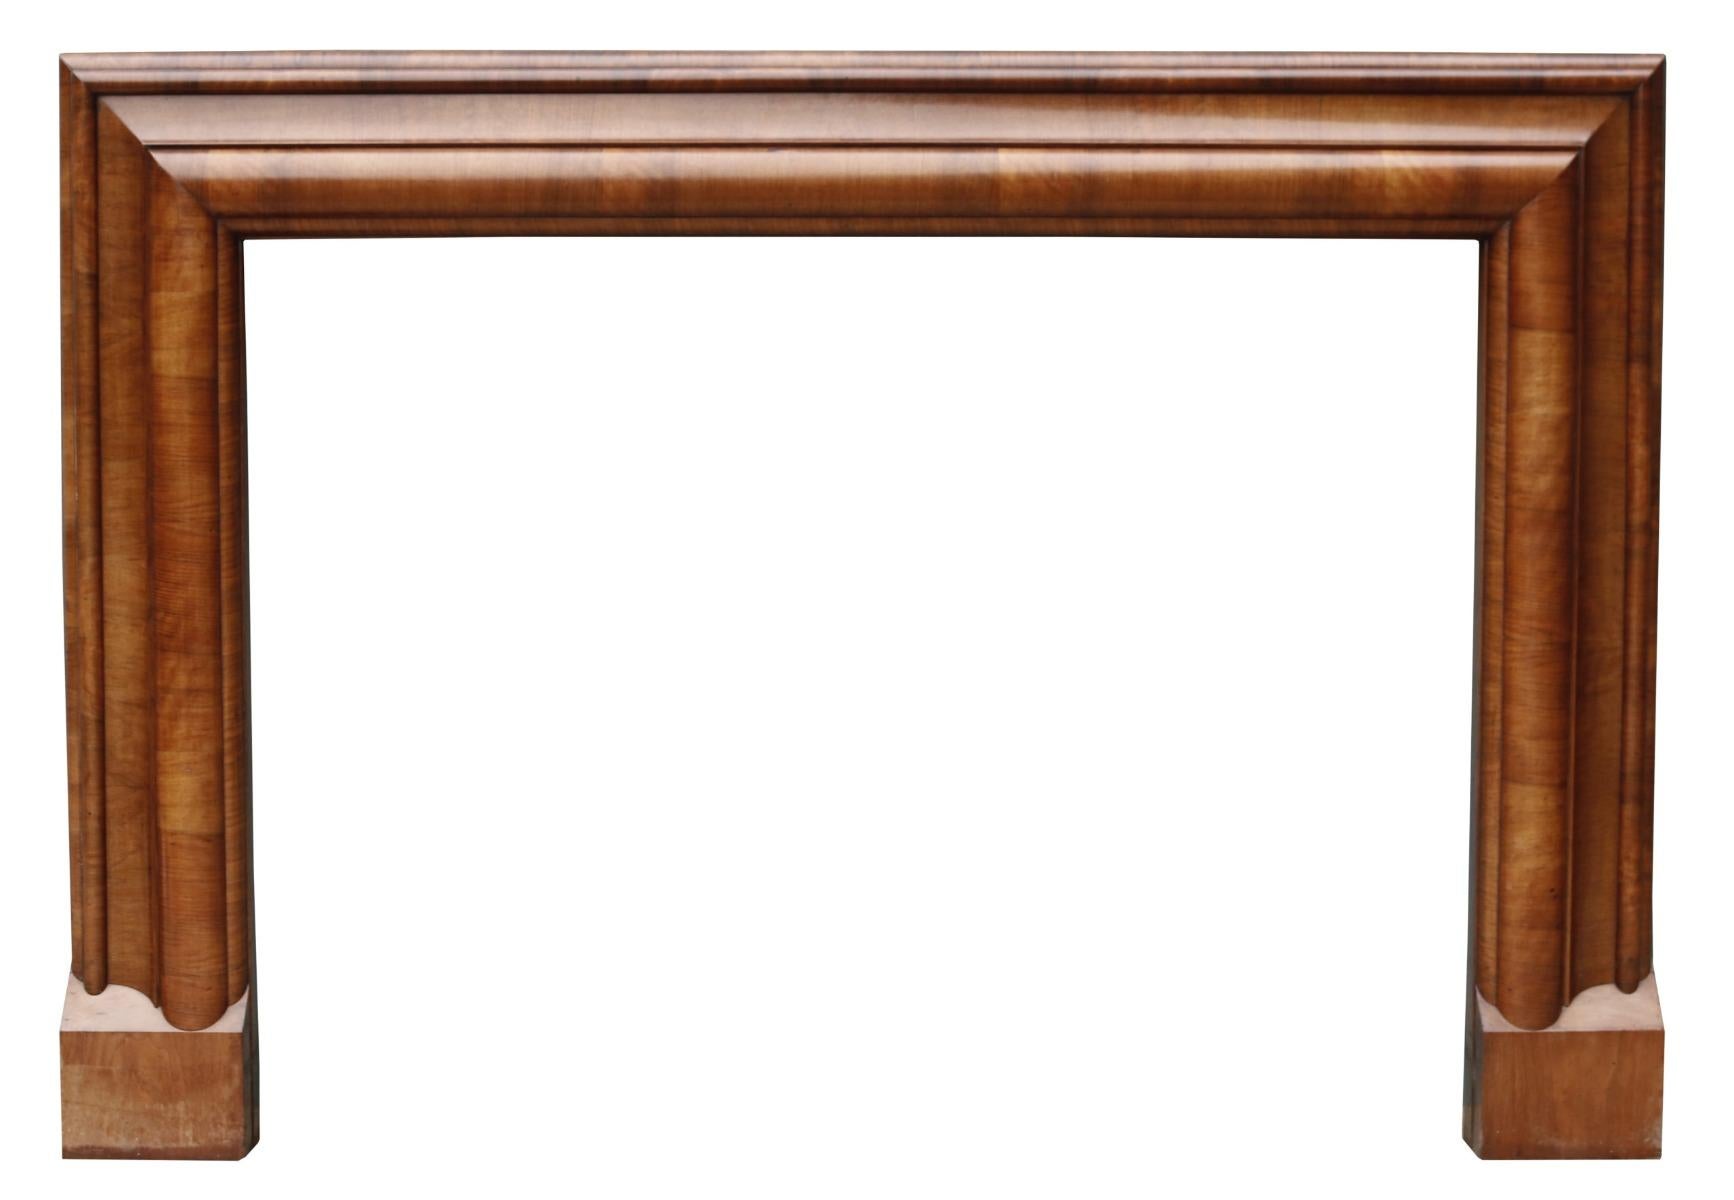 An original Art Deco style fire surround of bolection form, veneered in burr walnut.

Additional dimensions:
Opening height 90.5 cm

Opening width 121 cm

Width between outsides of the foot blocks 157.5 cm.